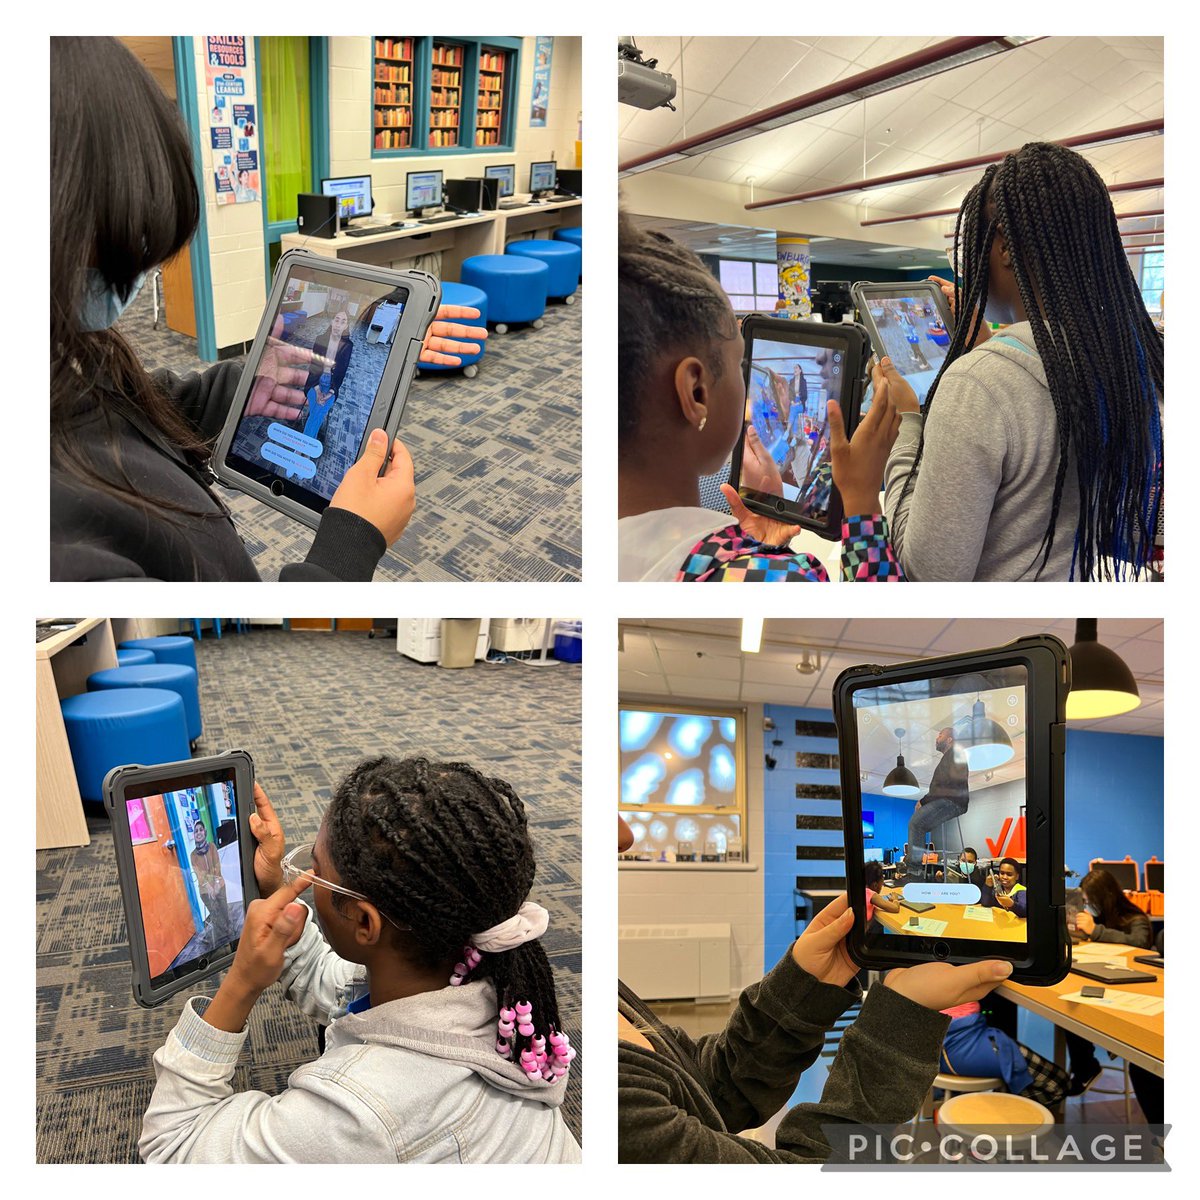 Career Day augmented reality app in the library today #verizoninnovation. #JCPSLibraries